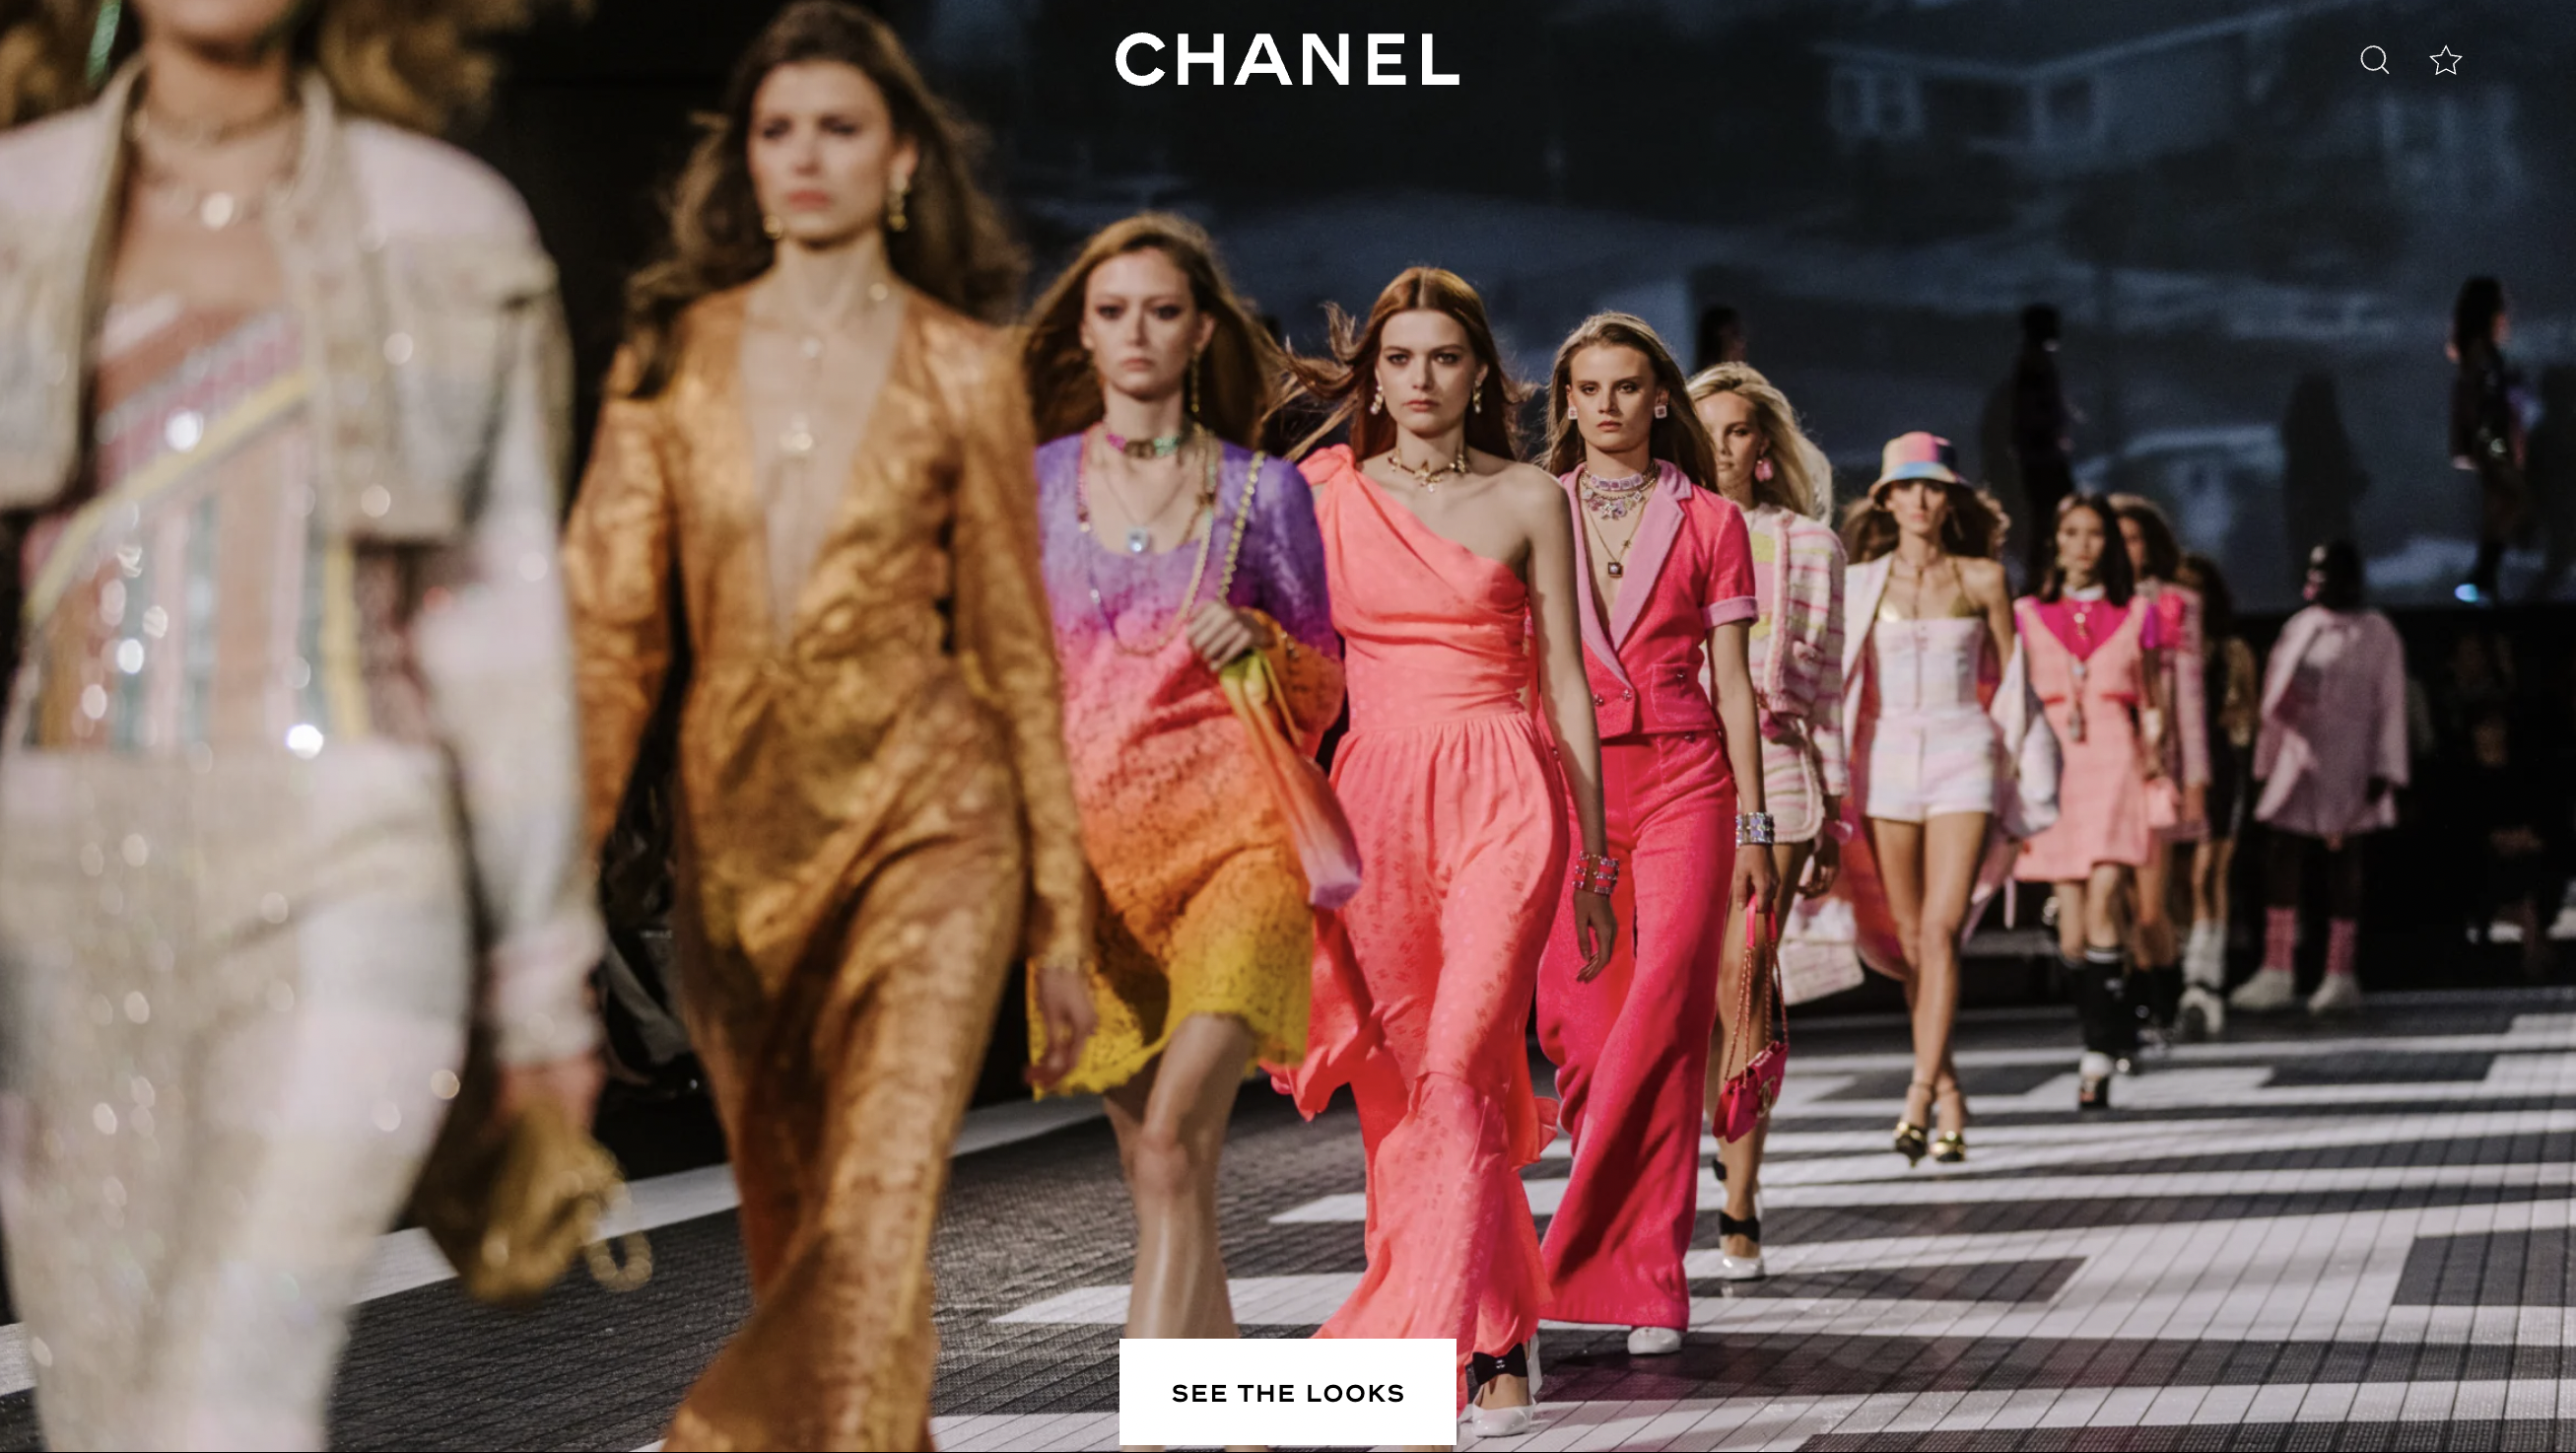 Chanel Releases Annual Financial Report, CEO Denies IPO Rumors and Expresses Optimism for 2023 Outlook